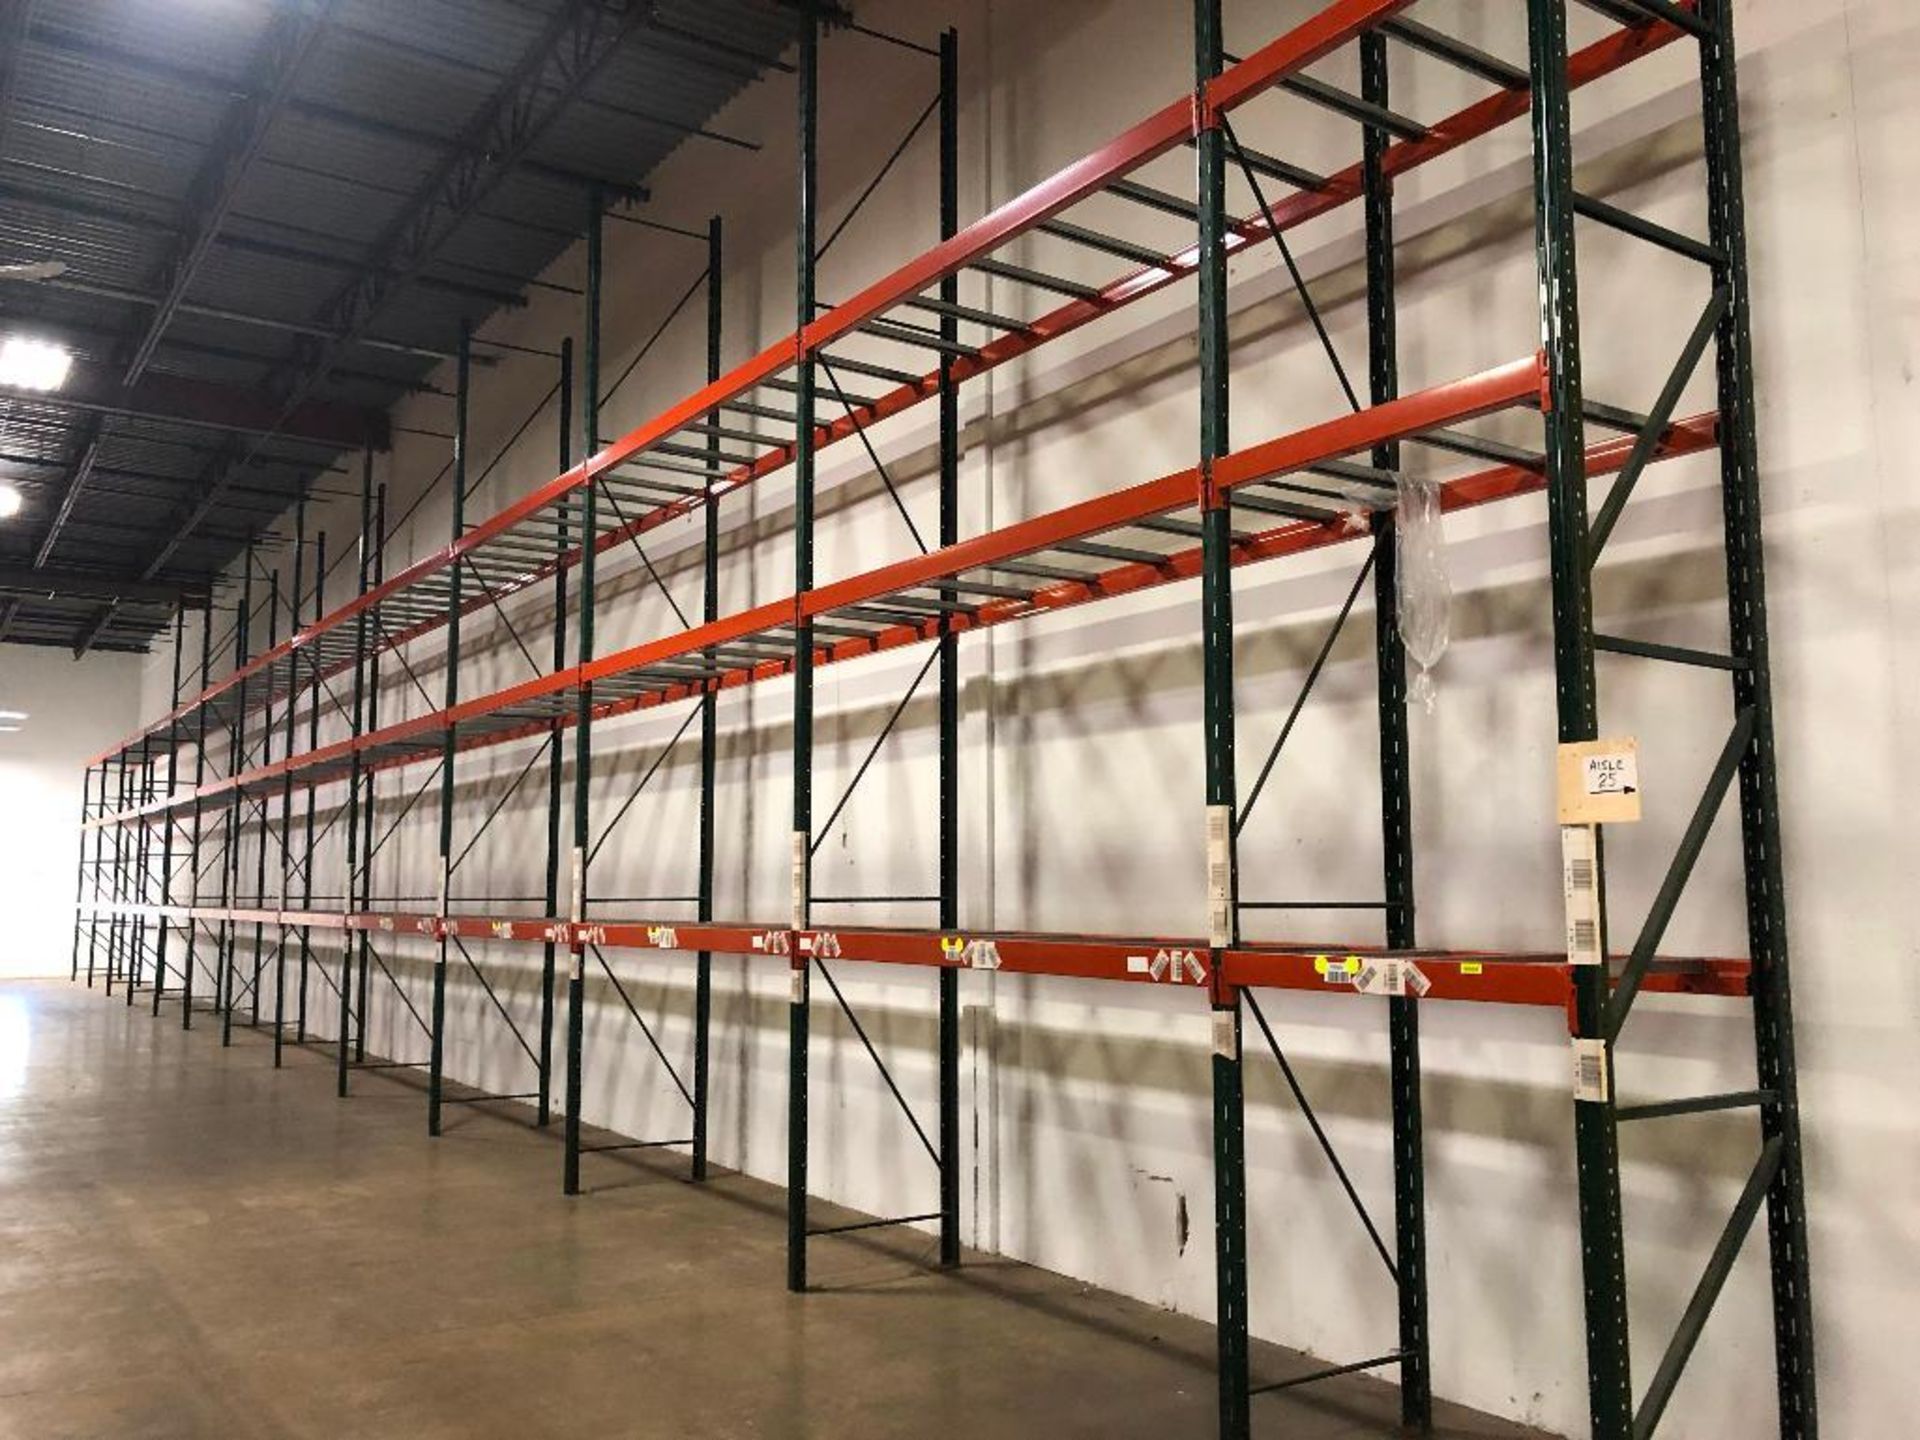 DESCRIPTION: (7) SECTIONS OF 9' X 3' X 18' PALLET RACKING, (1) SECTION OF 3' X 3' X 18' PALLET RACKI